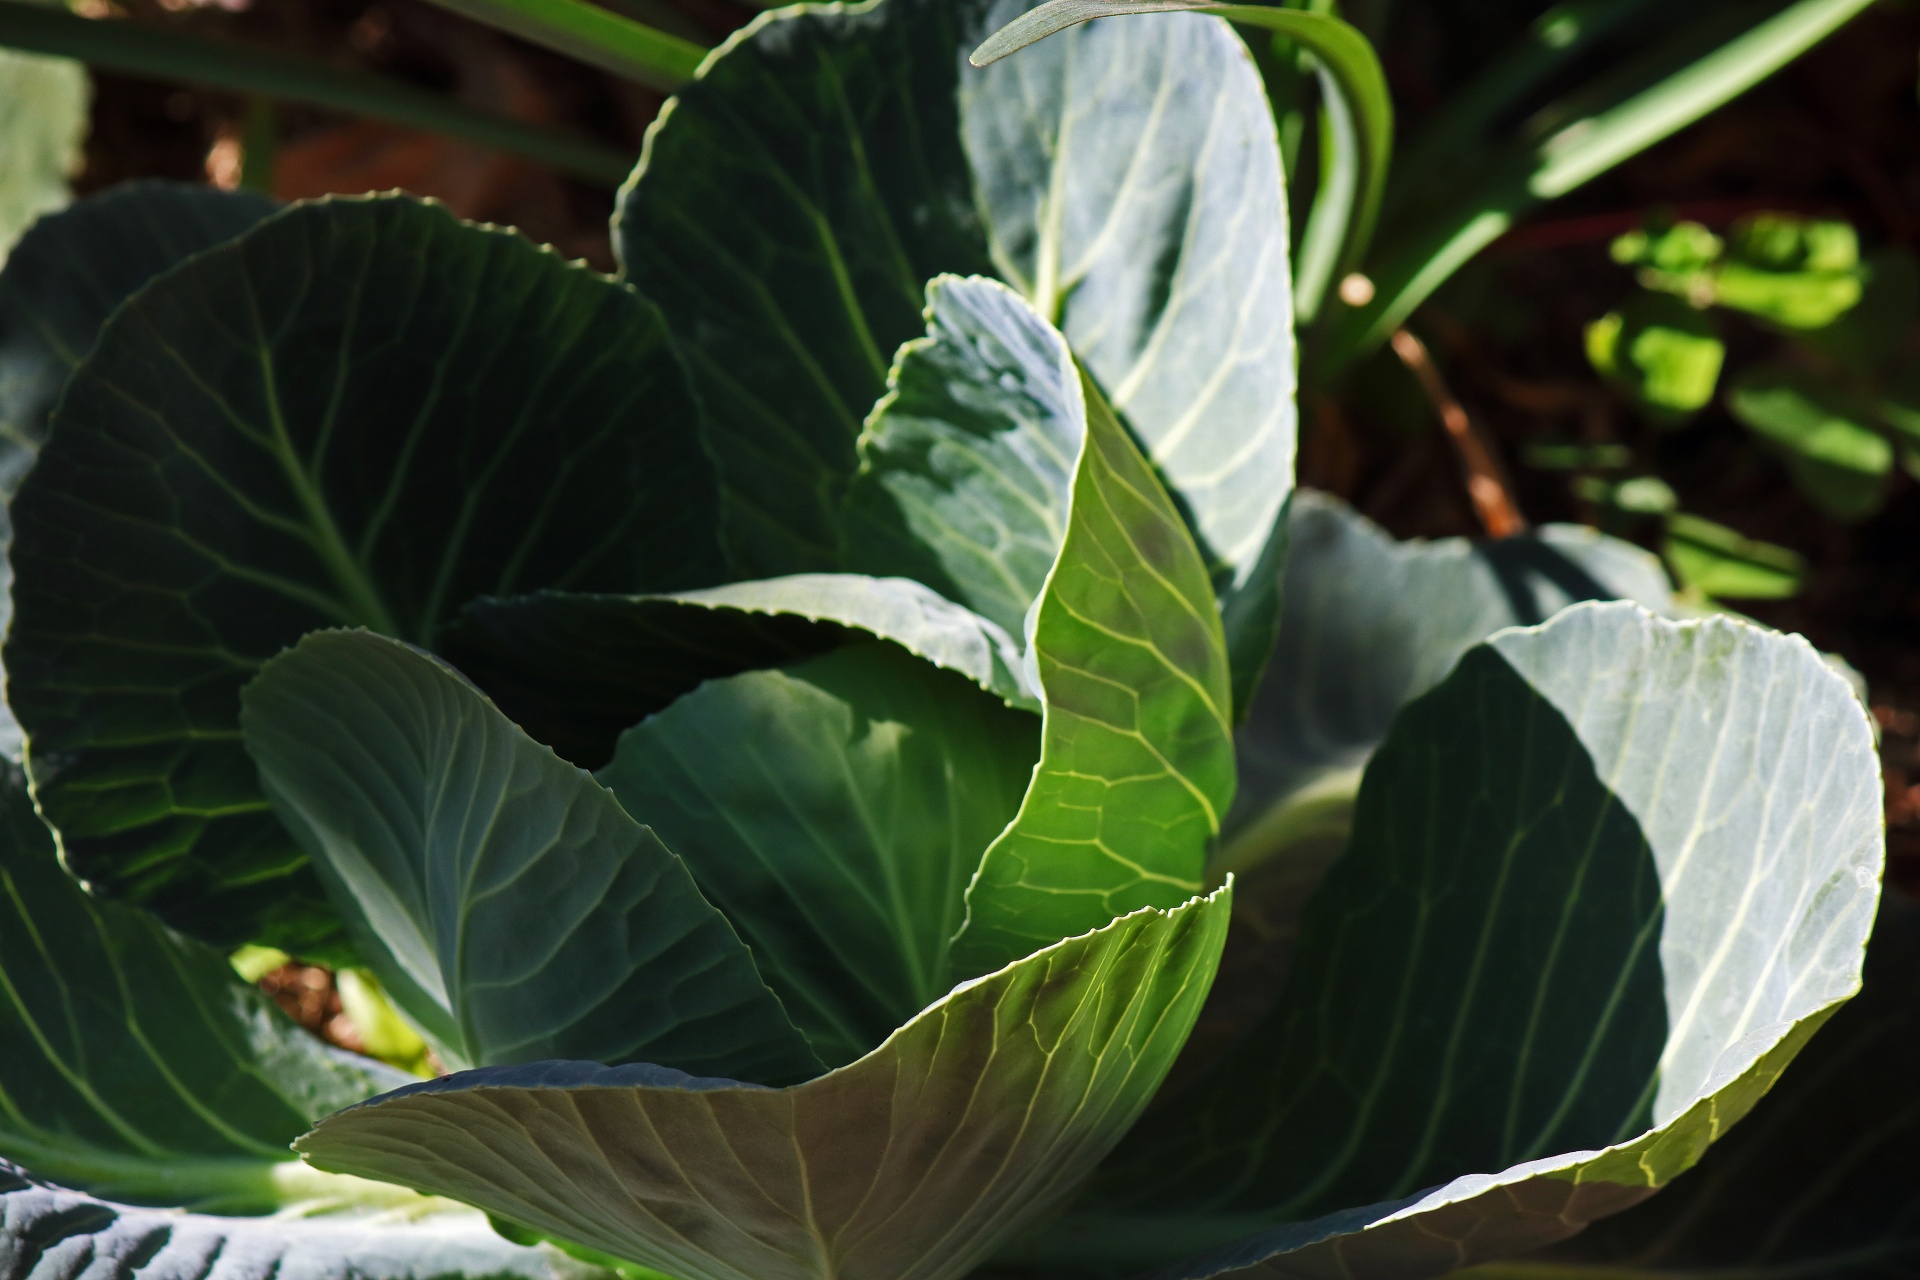 cupping outer leaves of a developing cabbage